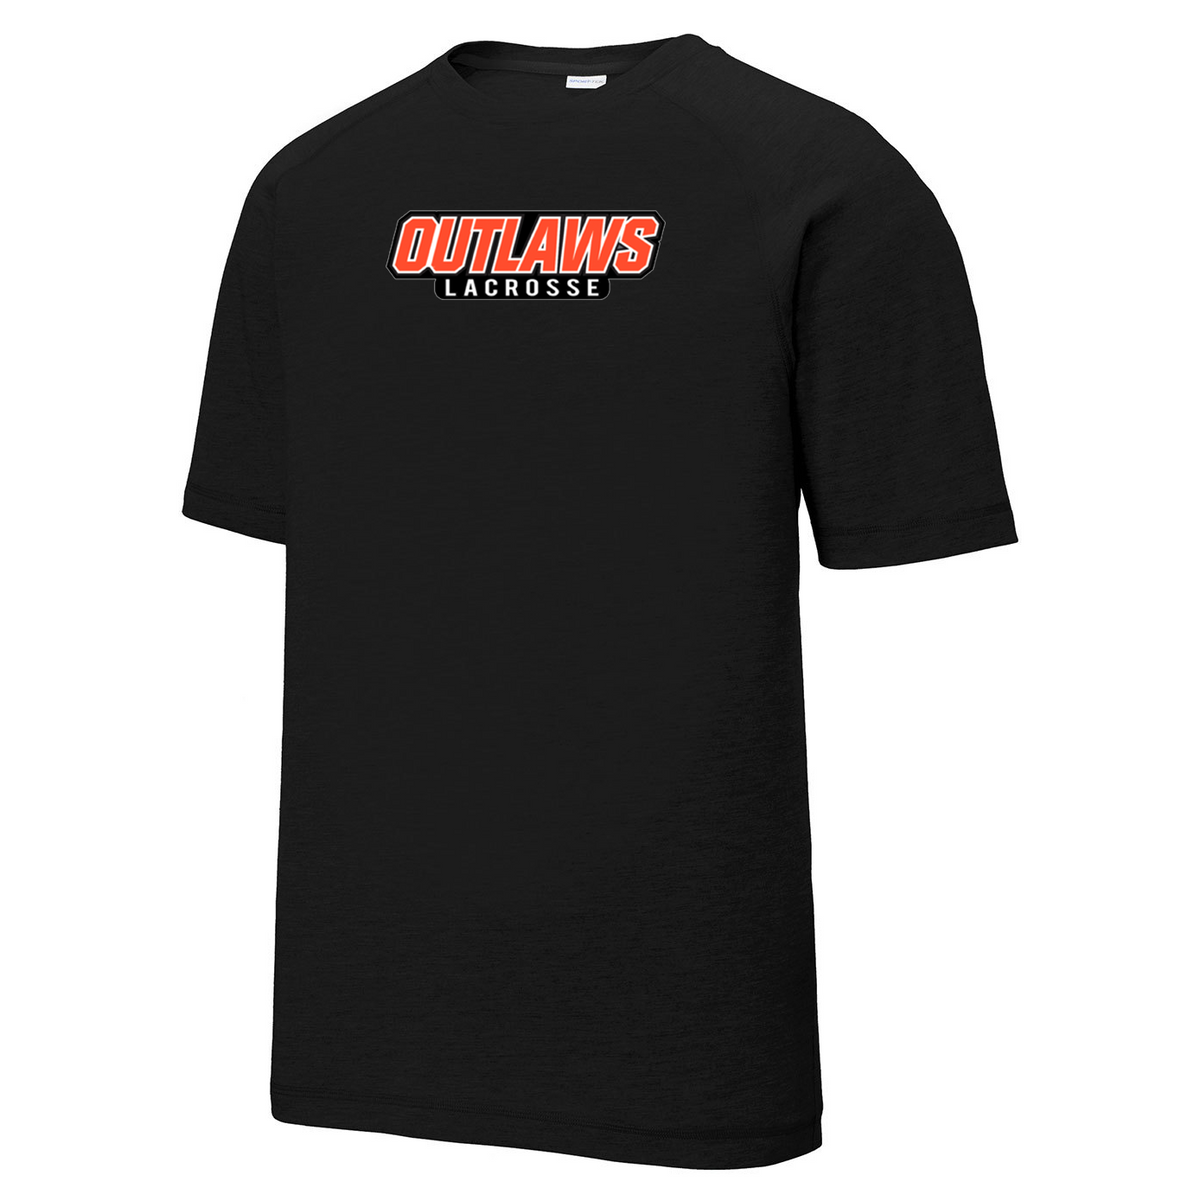 Outlaws Lacrosse Raglan CottonTouch Tee